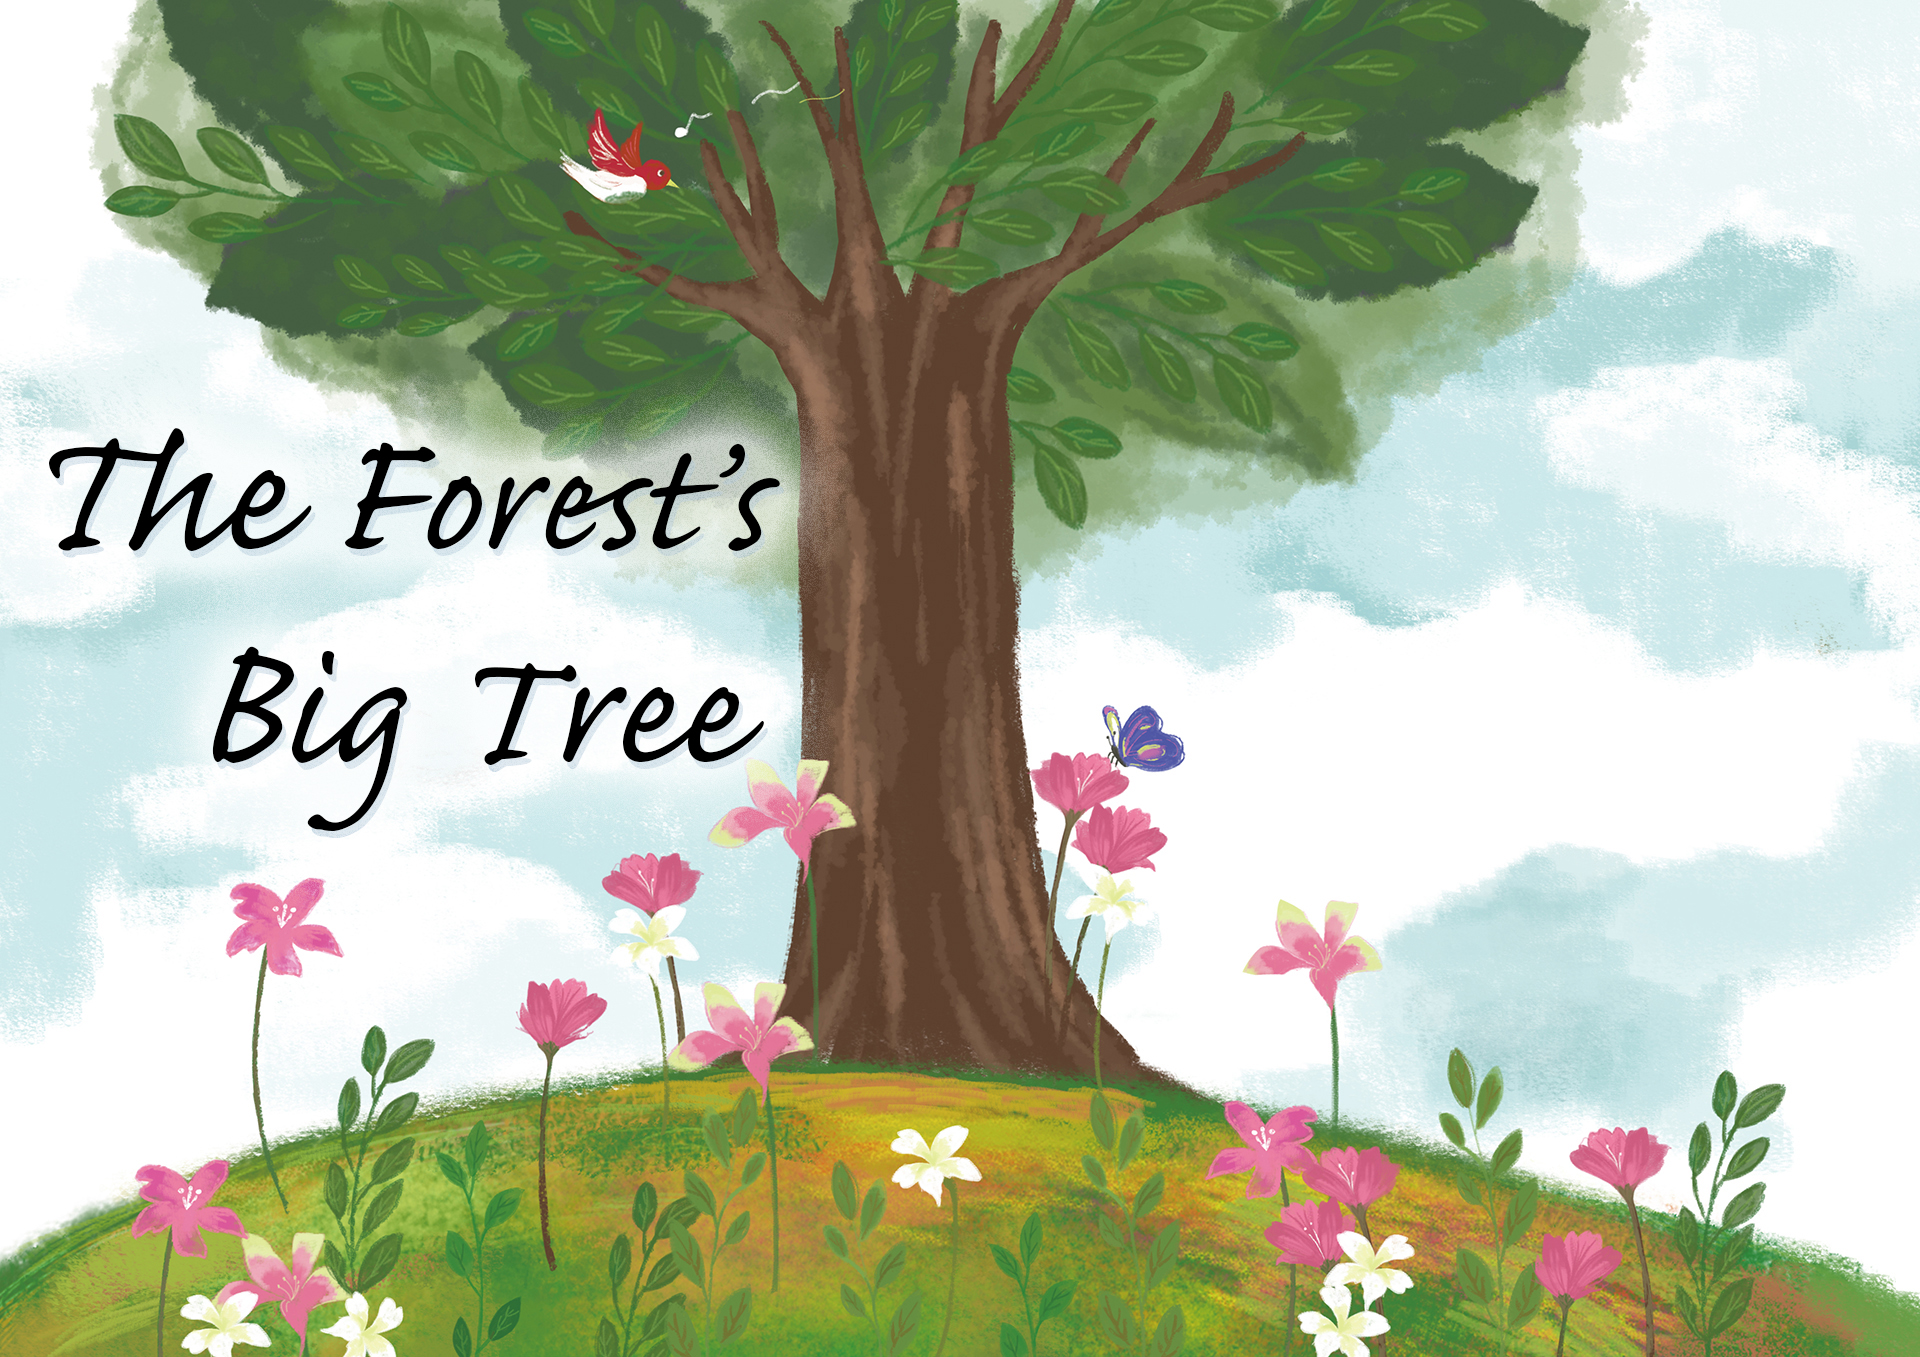 The Forest’s Big Tree